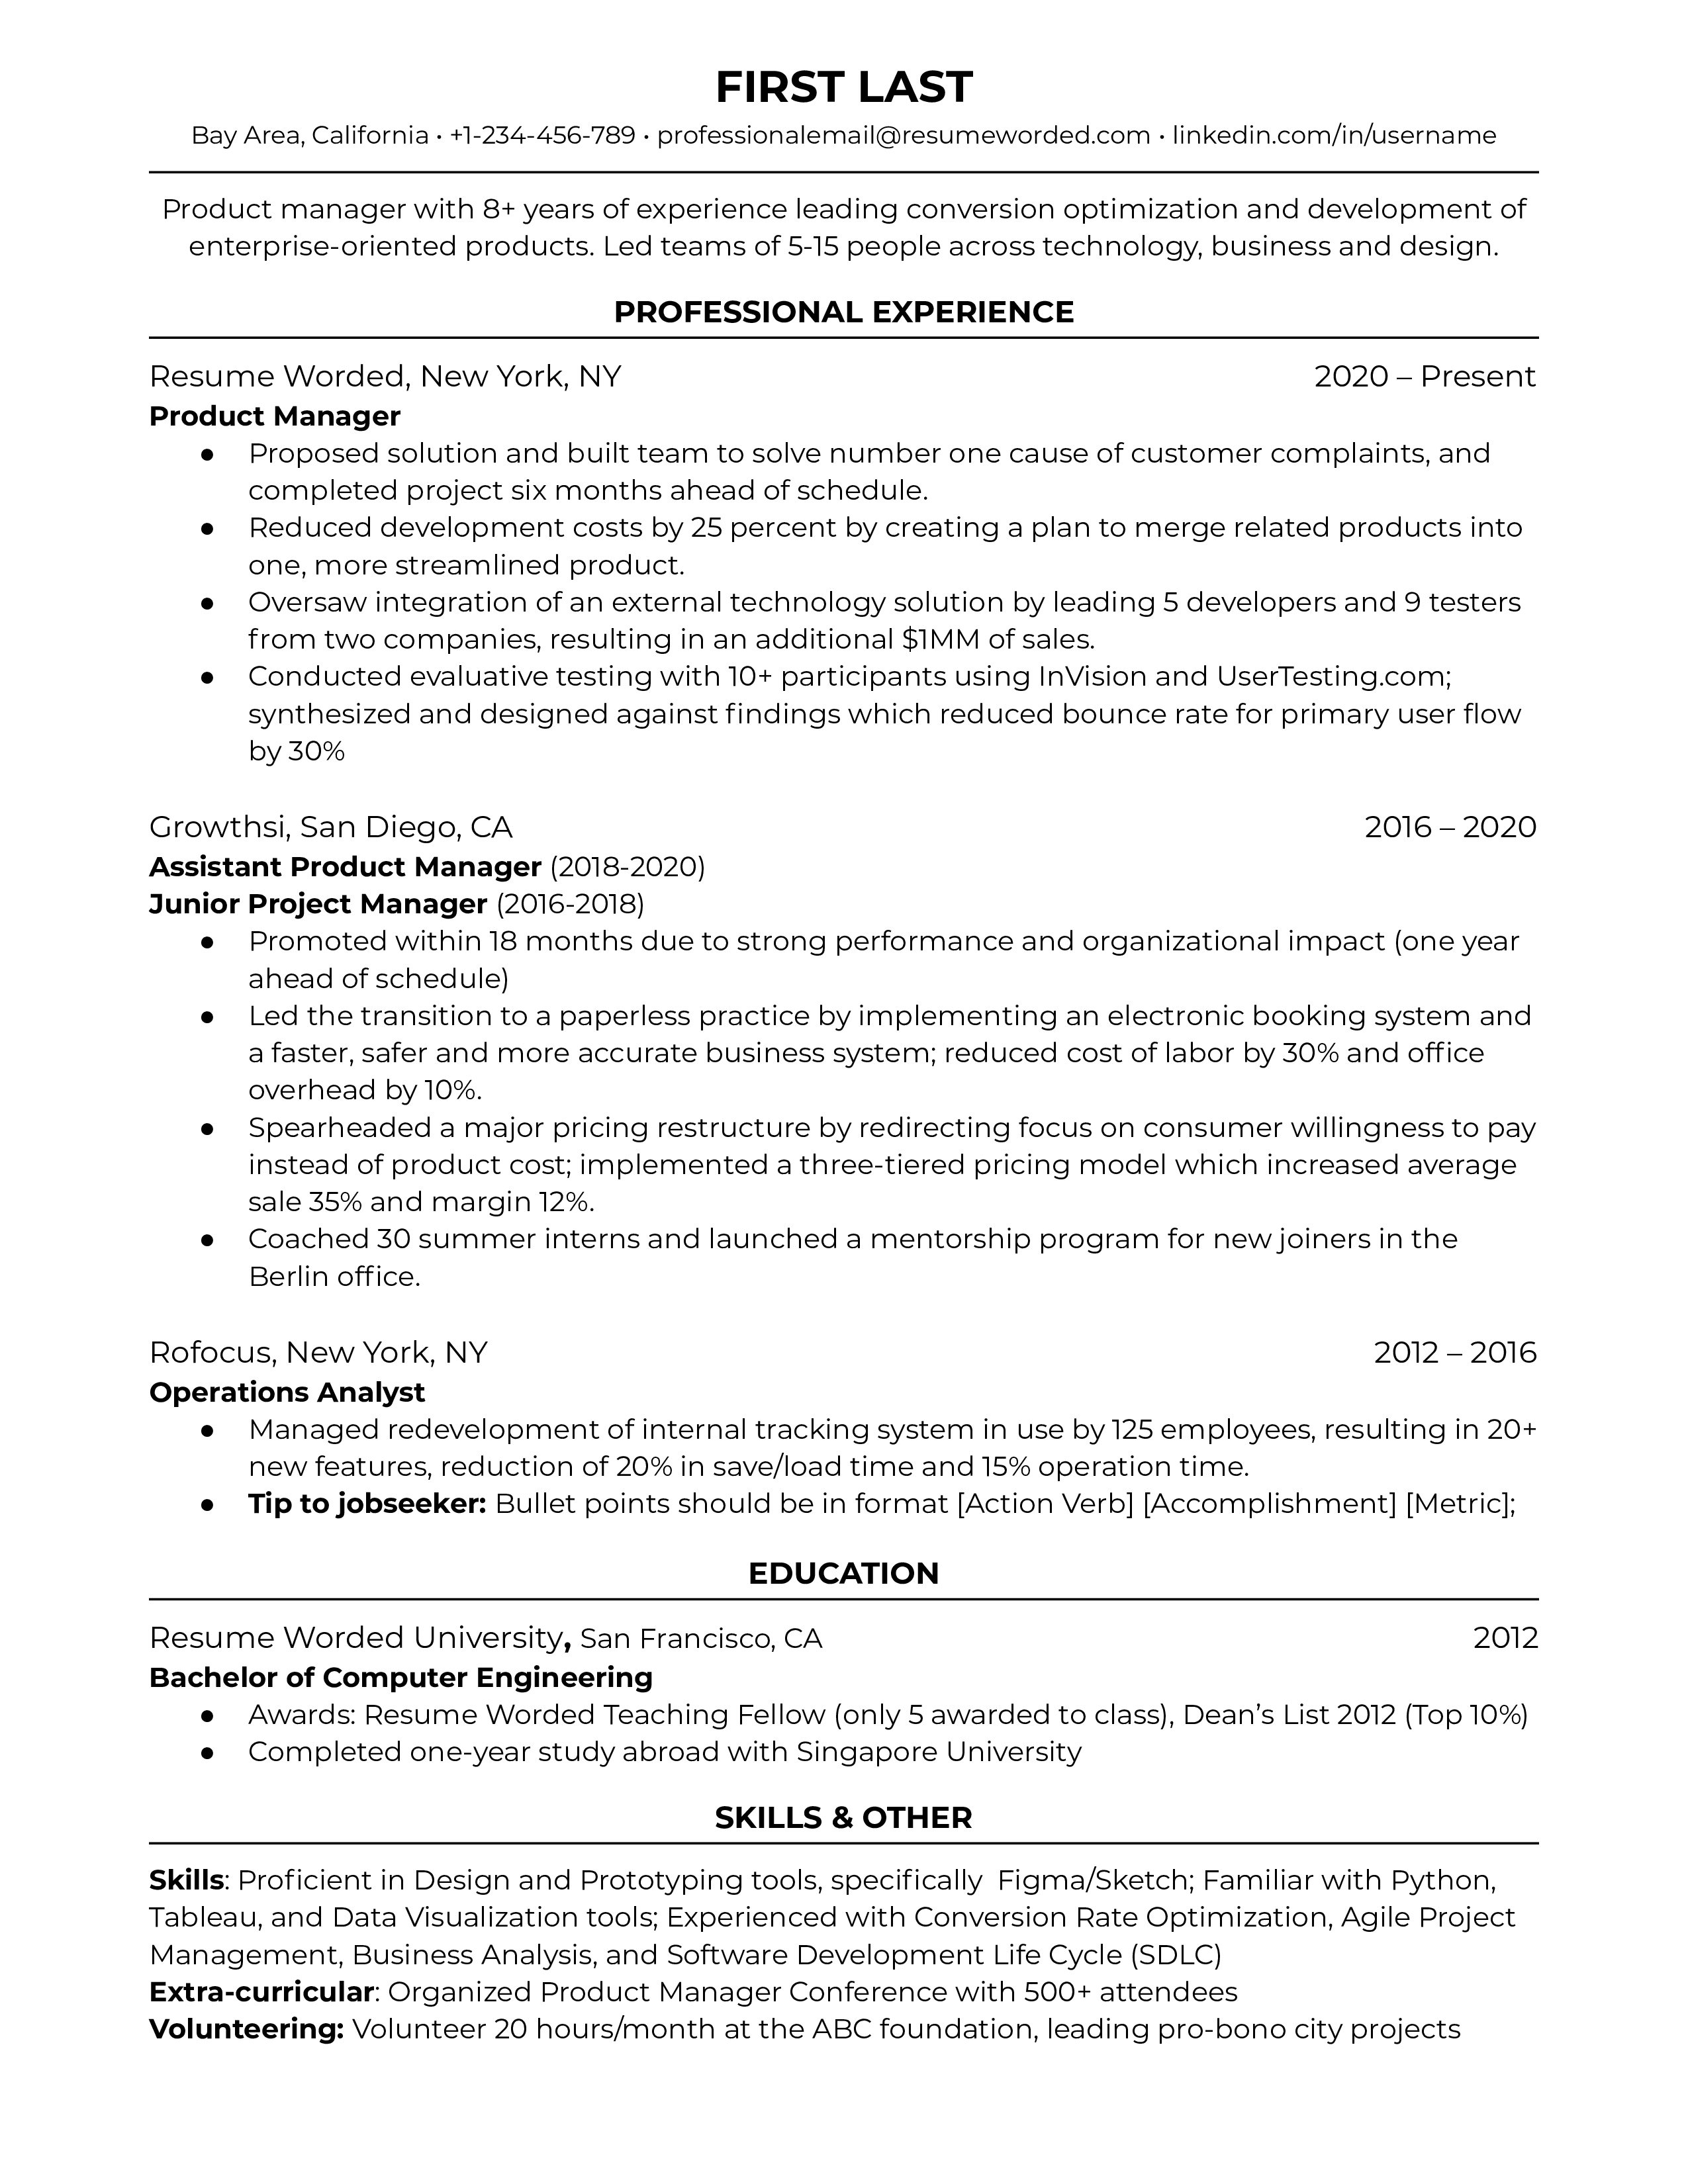 Detail-filled CV of an experienced product manager, highlighting technical and customer-focused achievements.